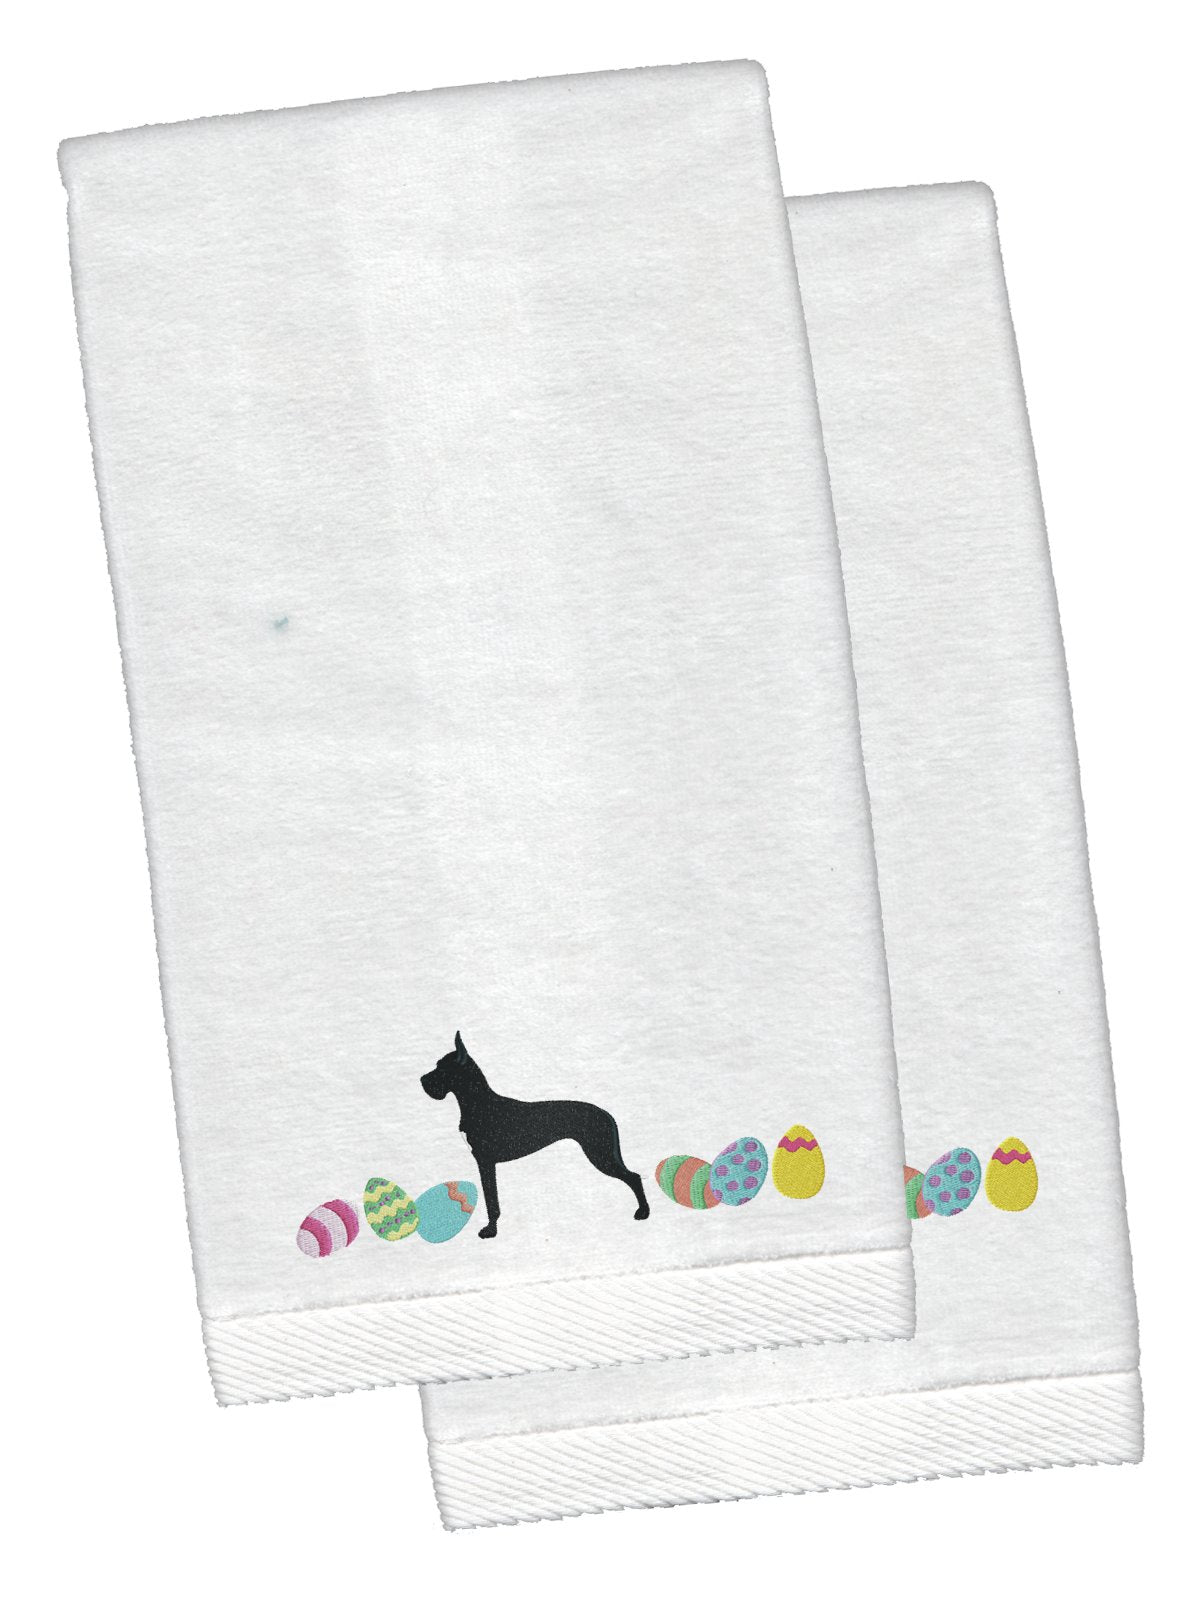 Great Dane Easter White Embroidered Plush Hand Towel Set of 2 CK1649KTEMB by Caroline's Treasures